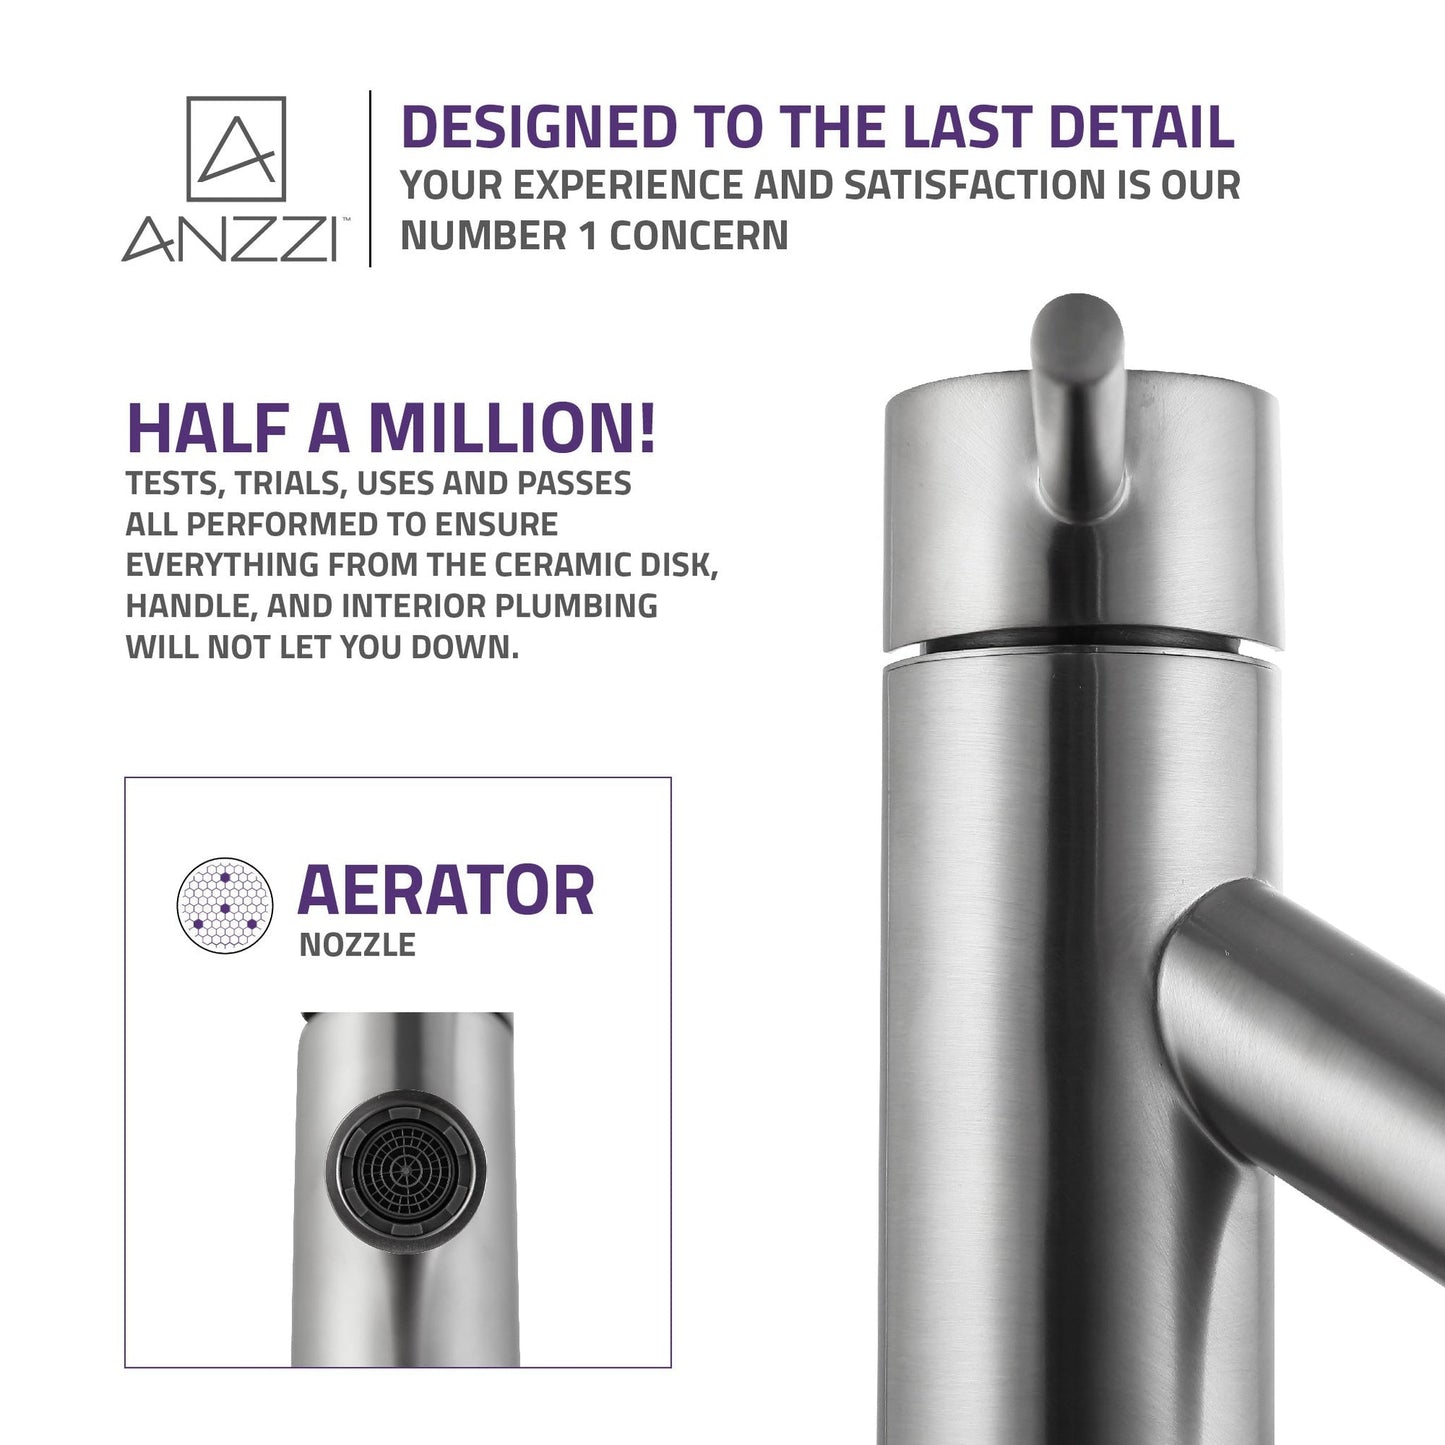 ANZZI Valle Series 3" Single Hole Brushed Nickel Bathroom Sink Faucet